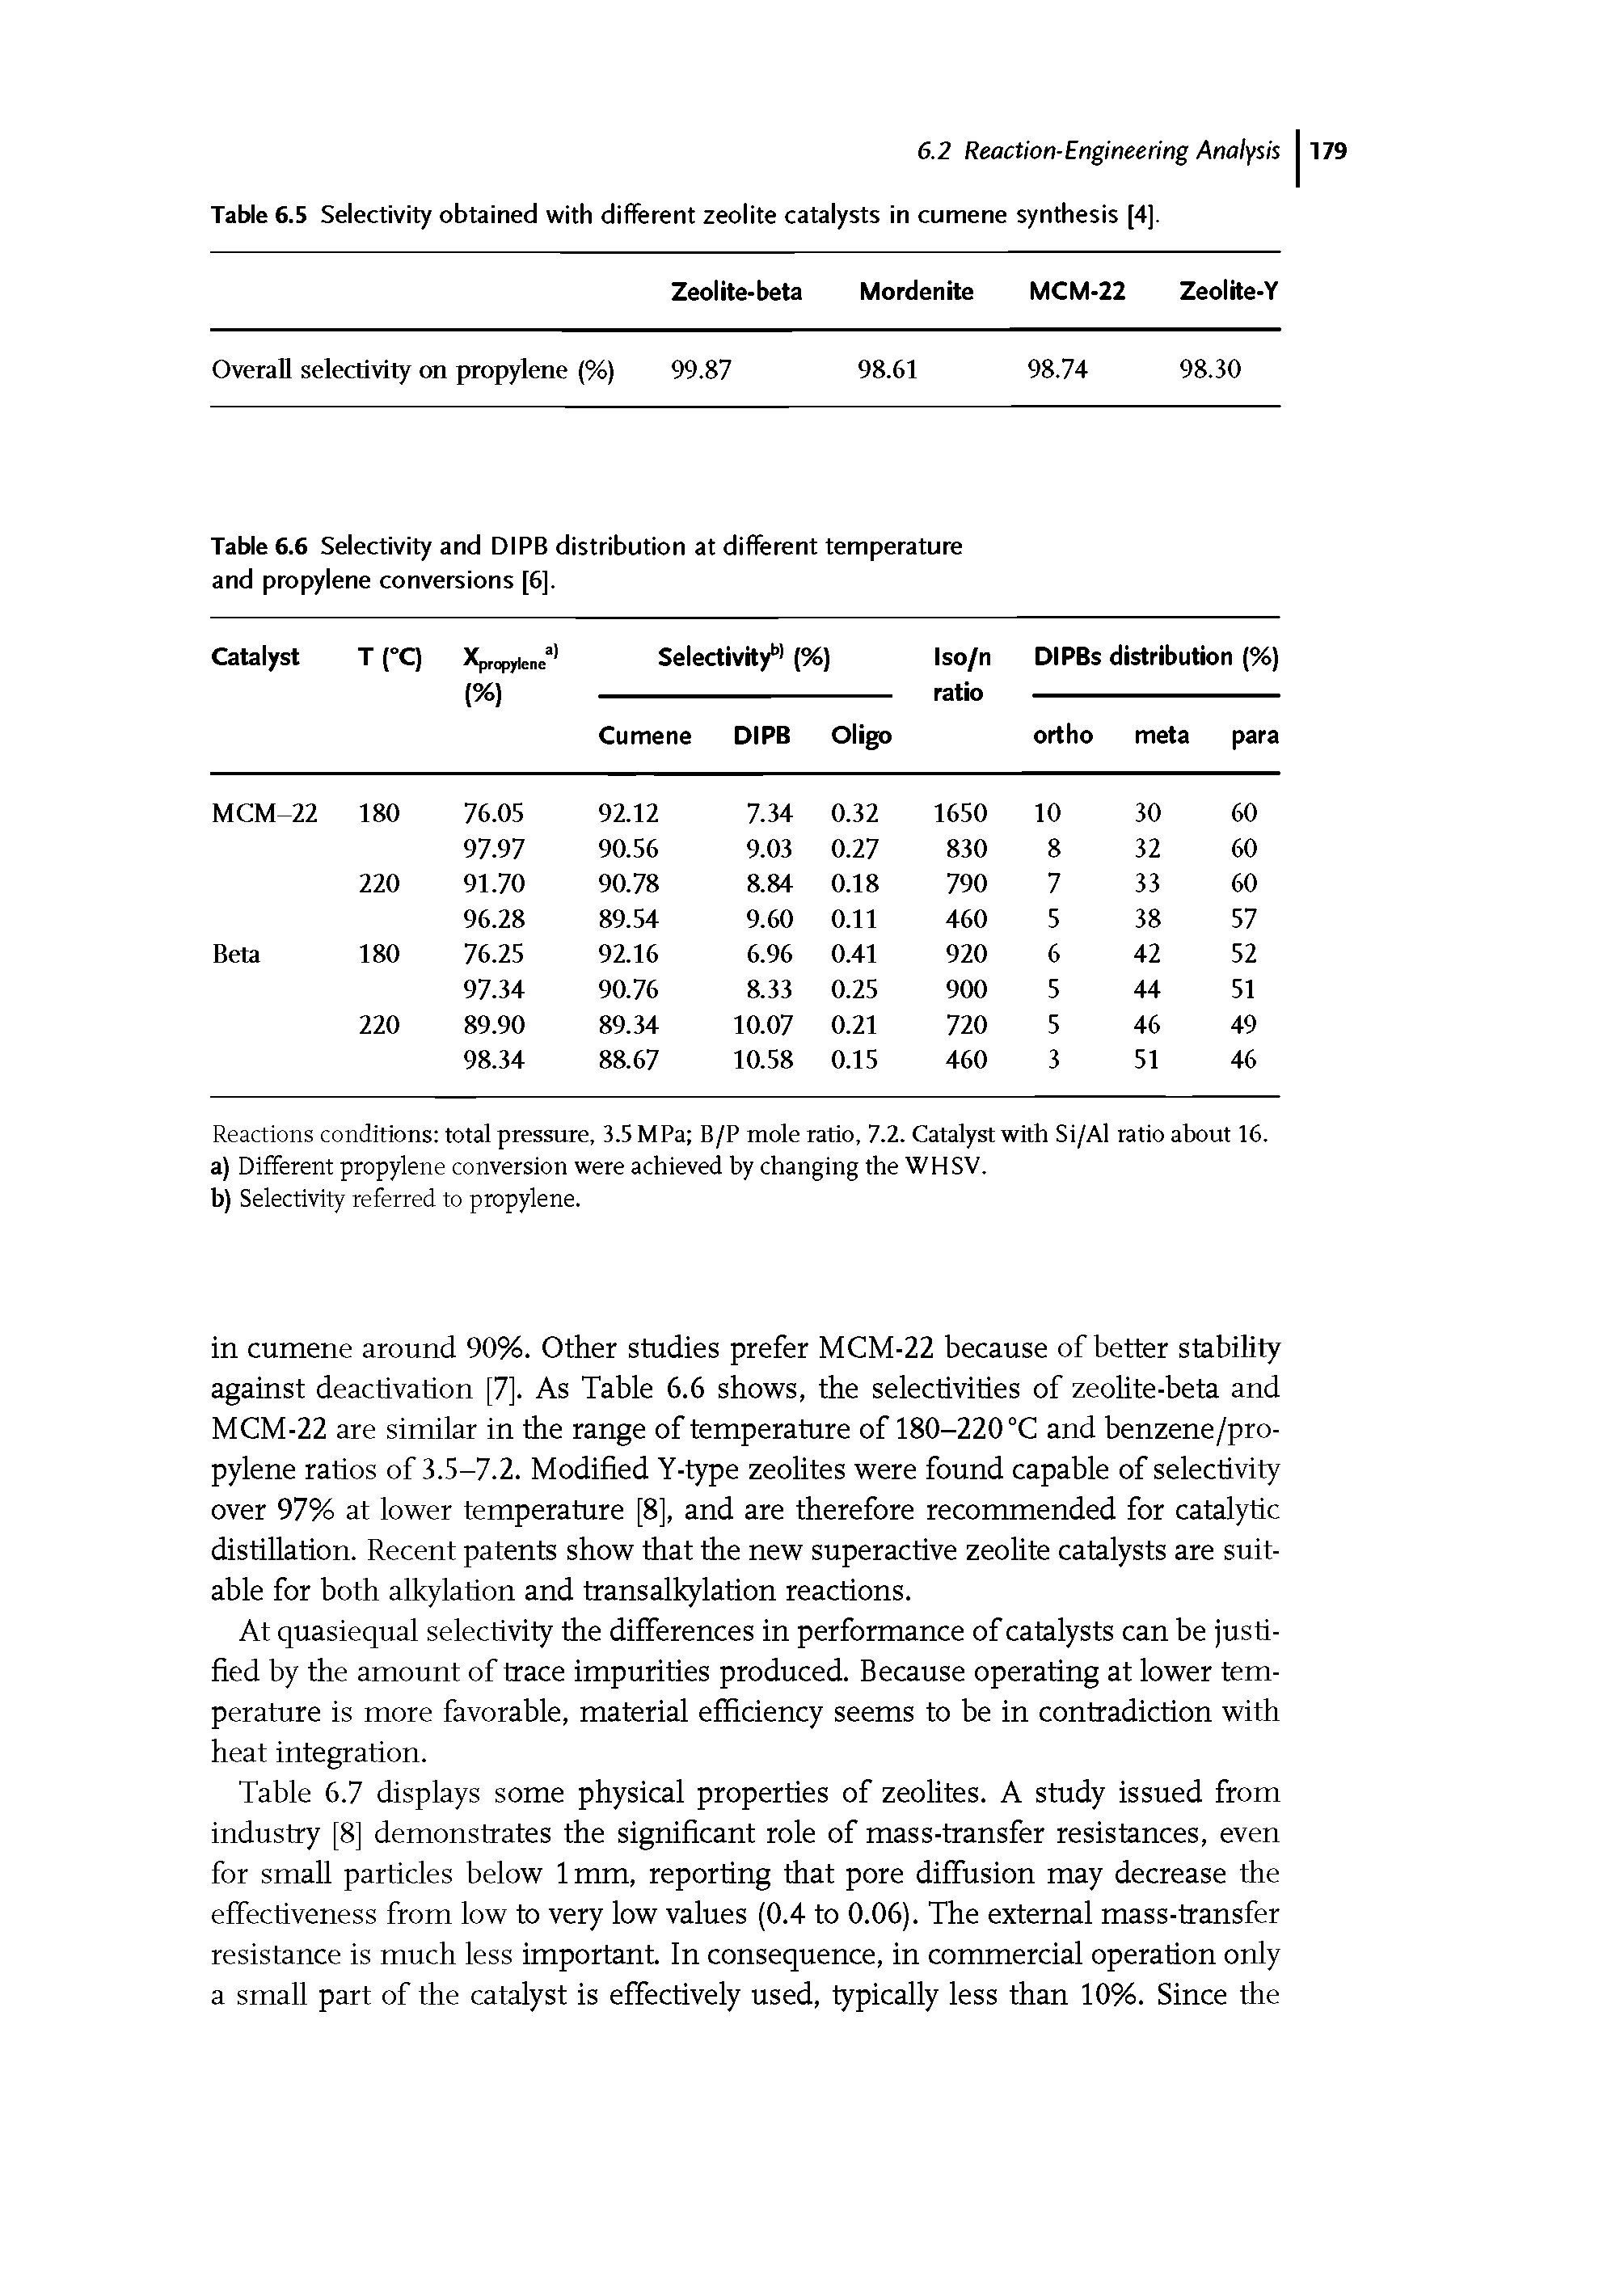 Table 6.5 Selectivity obtained with different zeolite catalysts in cumene synthesis [4].